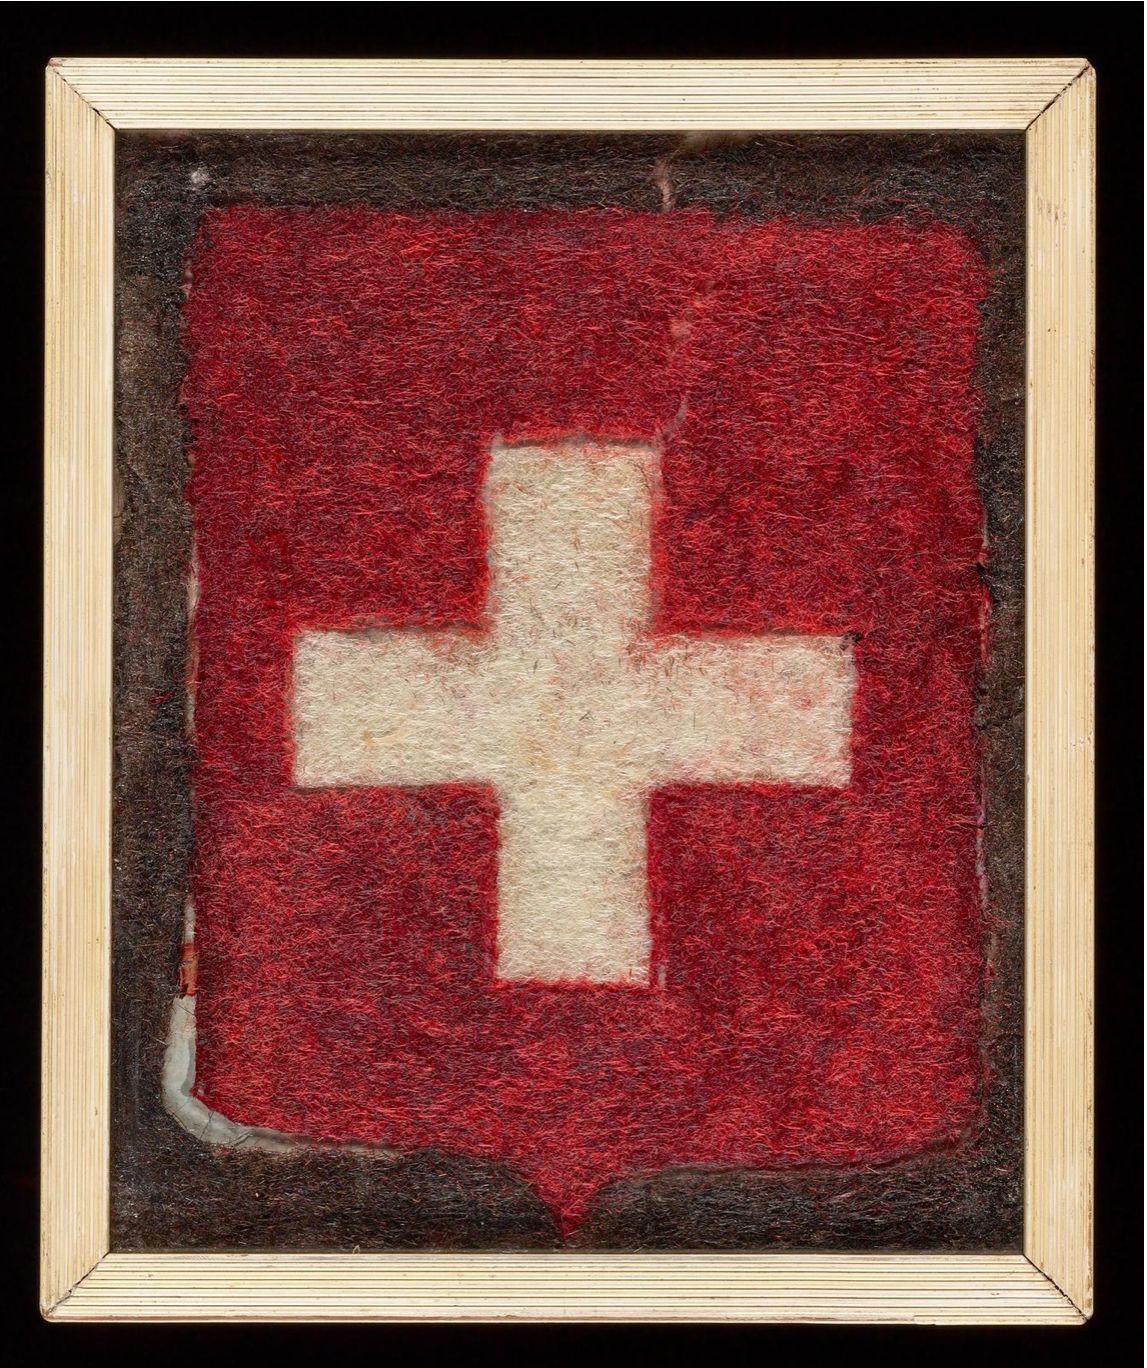 Swiss Cross Logo - We are fans of “care” crosses, this beauty not unlike our Iles logo ...